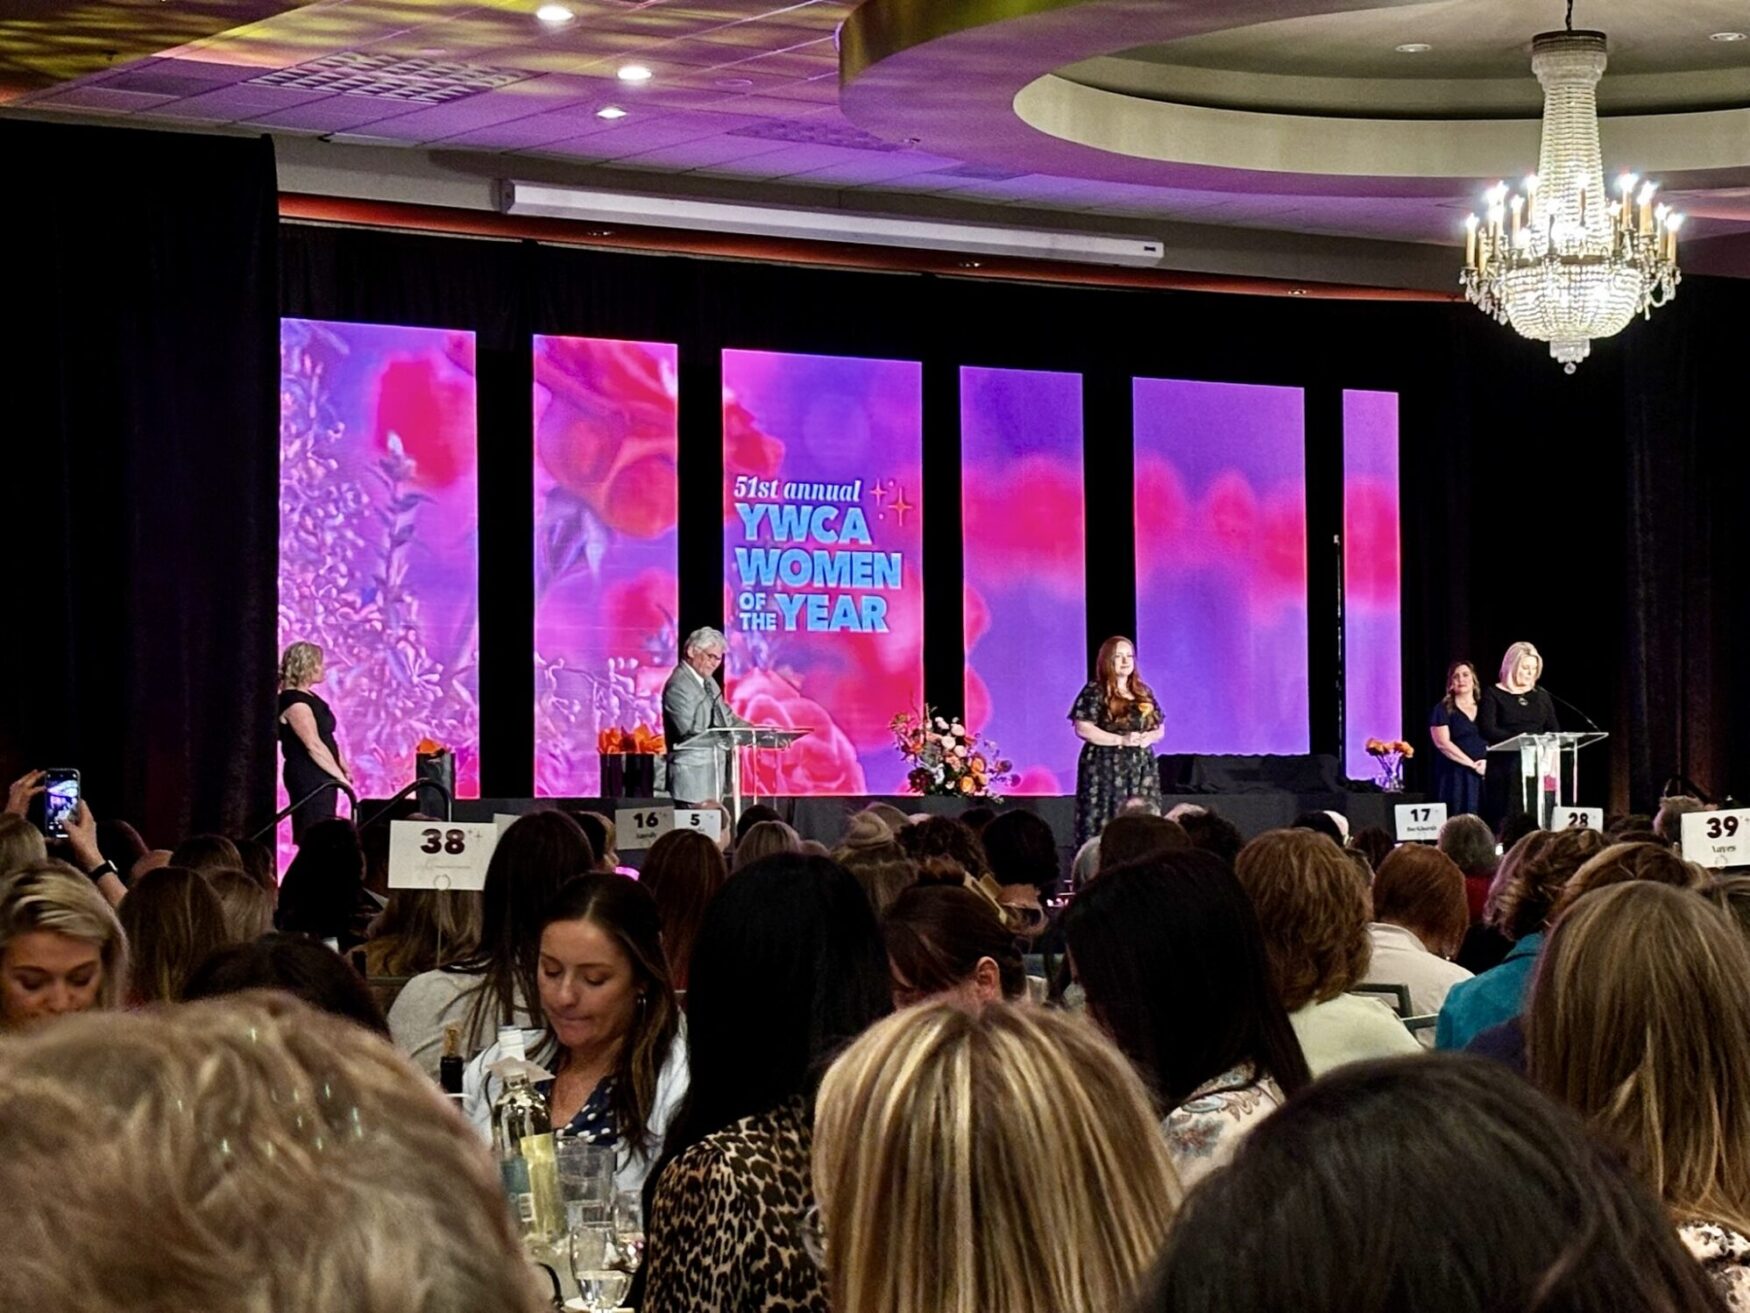 Indoor event scene showing a speaker at a podium during the 51st annual YWCA Women of the Year awards, with attendees in the foreground and colorful screens in the background.